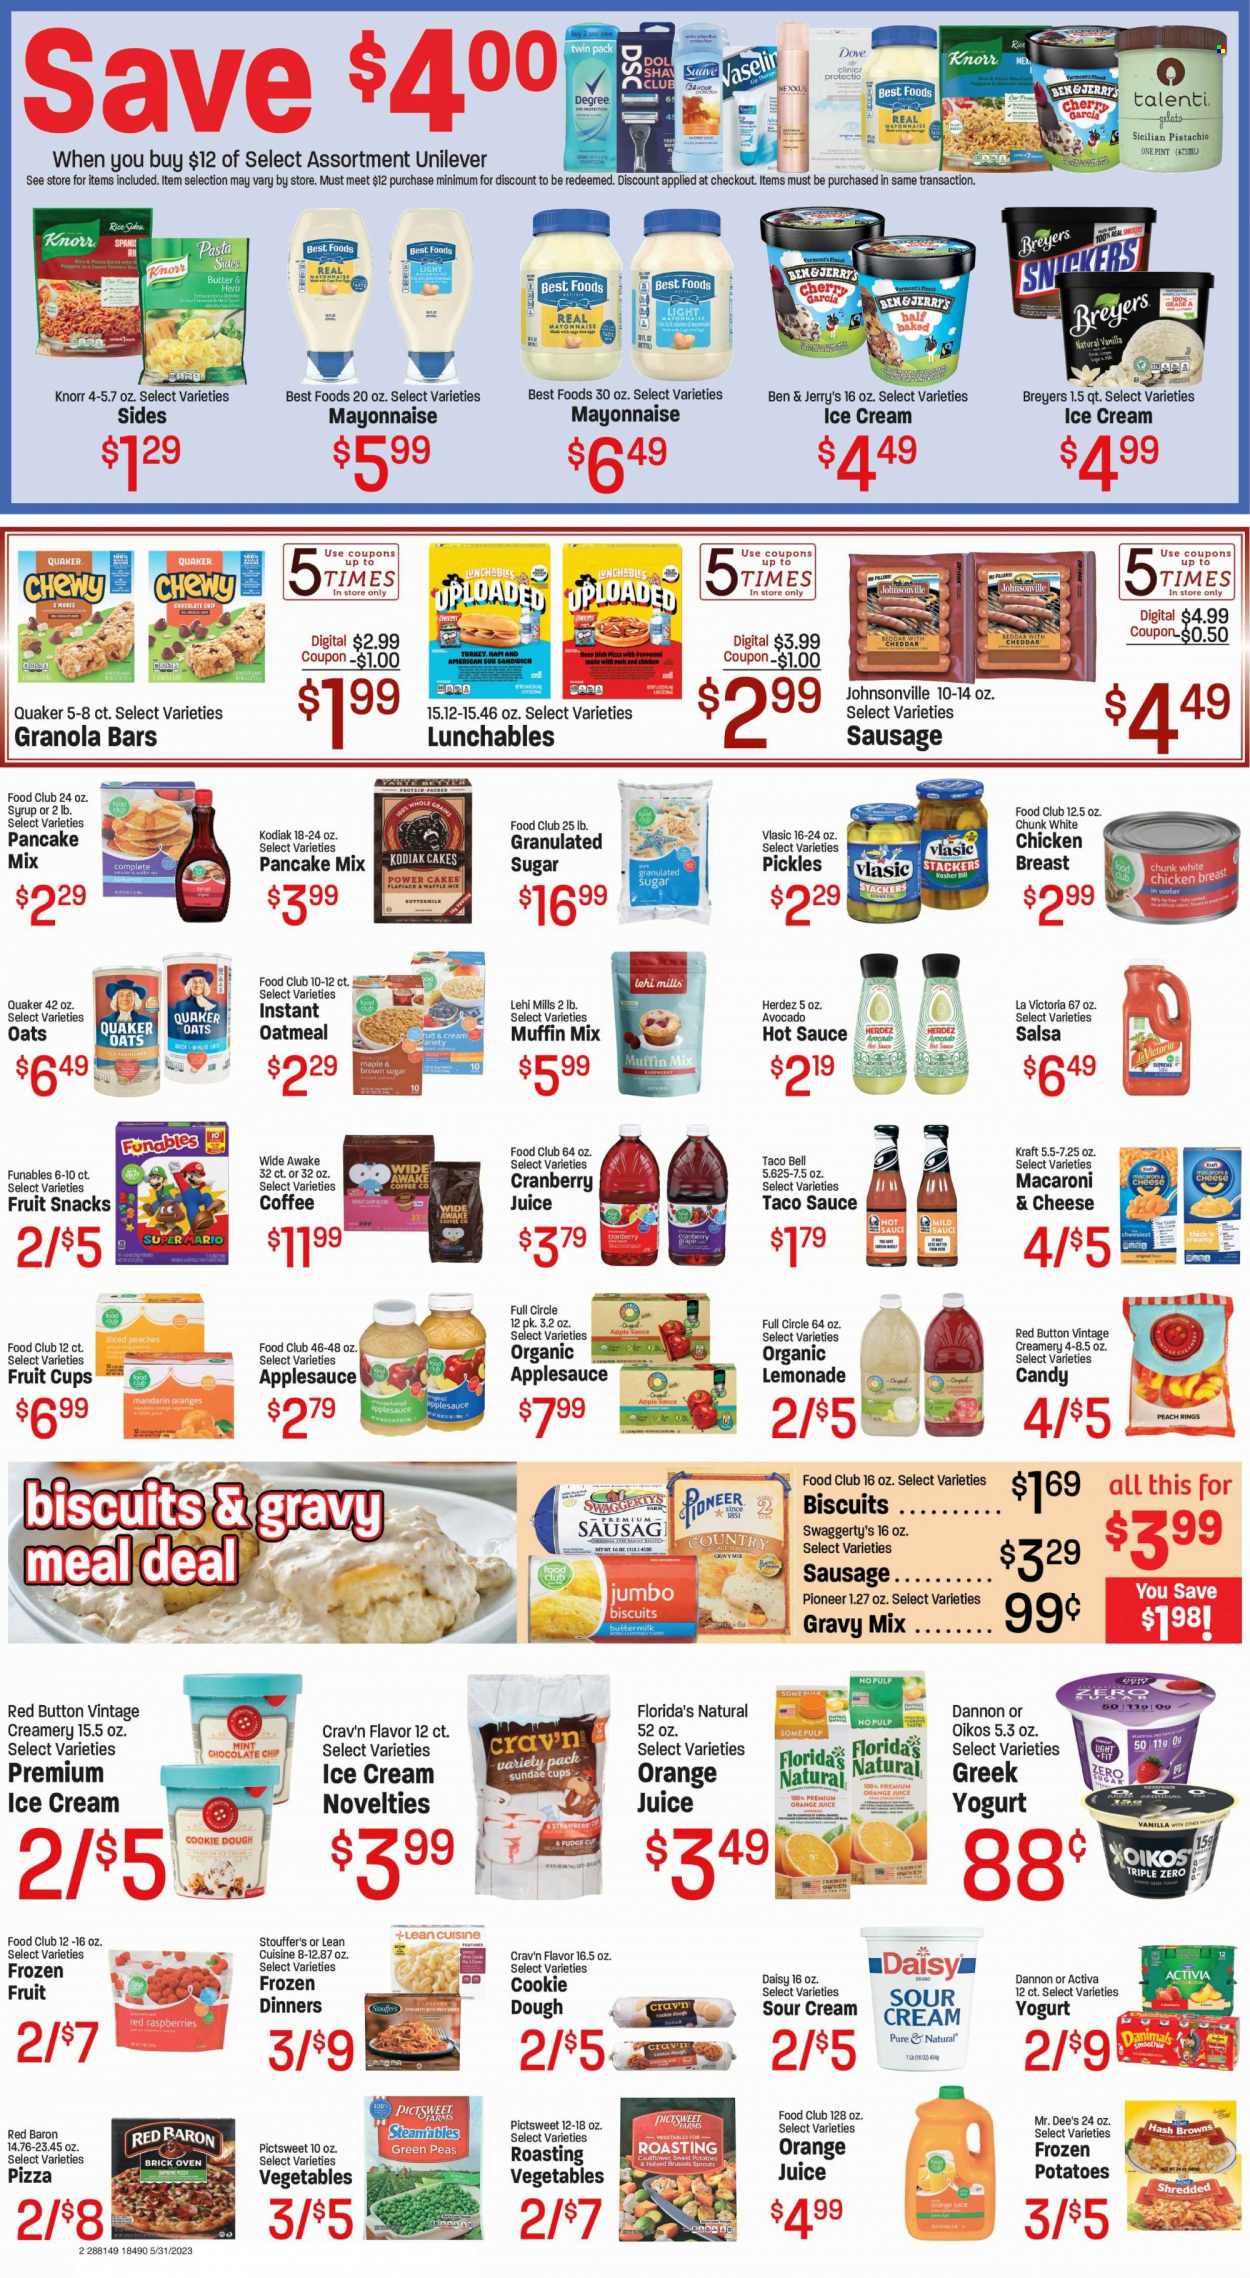 thumbnail - Red Apple Marketplace Flyer - 05/31/2023 - 06/06/2023 - Sales products - cake, muffin mix, pancake mix, sweet potato, brussel sprouts, avocado, mandarines, raspberries, cherries, fruit cup, macaroni & cheese, spaghetti, pizza, sandwich, Knorr, sauce, Quaker, Lean Cuisine, pasta sides, Lunchables, Kraft®, Johnsonville, sausage, greek yoghurt, Activia, Oikos, Dannon, Danimals, buttermilk, cage free eggs, sour cream, mayonnaise, ice cream, Ben & Jerry's, Talenti Gelato, gelato, frozen fruit, Stouffer's, hash browns, Red Baron, Dove, fudge, chocolate chips, Snickers, biscuit, fruit snack, Florida's Natural, Candy, cane sugar, granulated sugar, oatmeal, oats, pickles, granola bar, rice, dill, gravy mix, taco sauce, hot sauce, salsa, apple sauce, syrup, cranberry juice, lemonade, orange juice, juice, water, chicken breasts, chicken, turkey, Suave, Nexxus, Degree. Page 2.